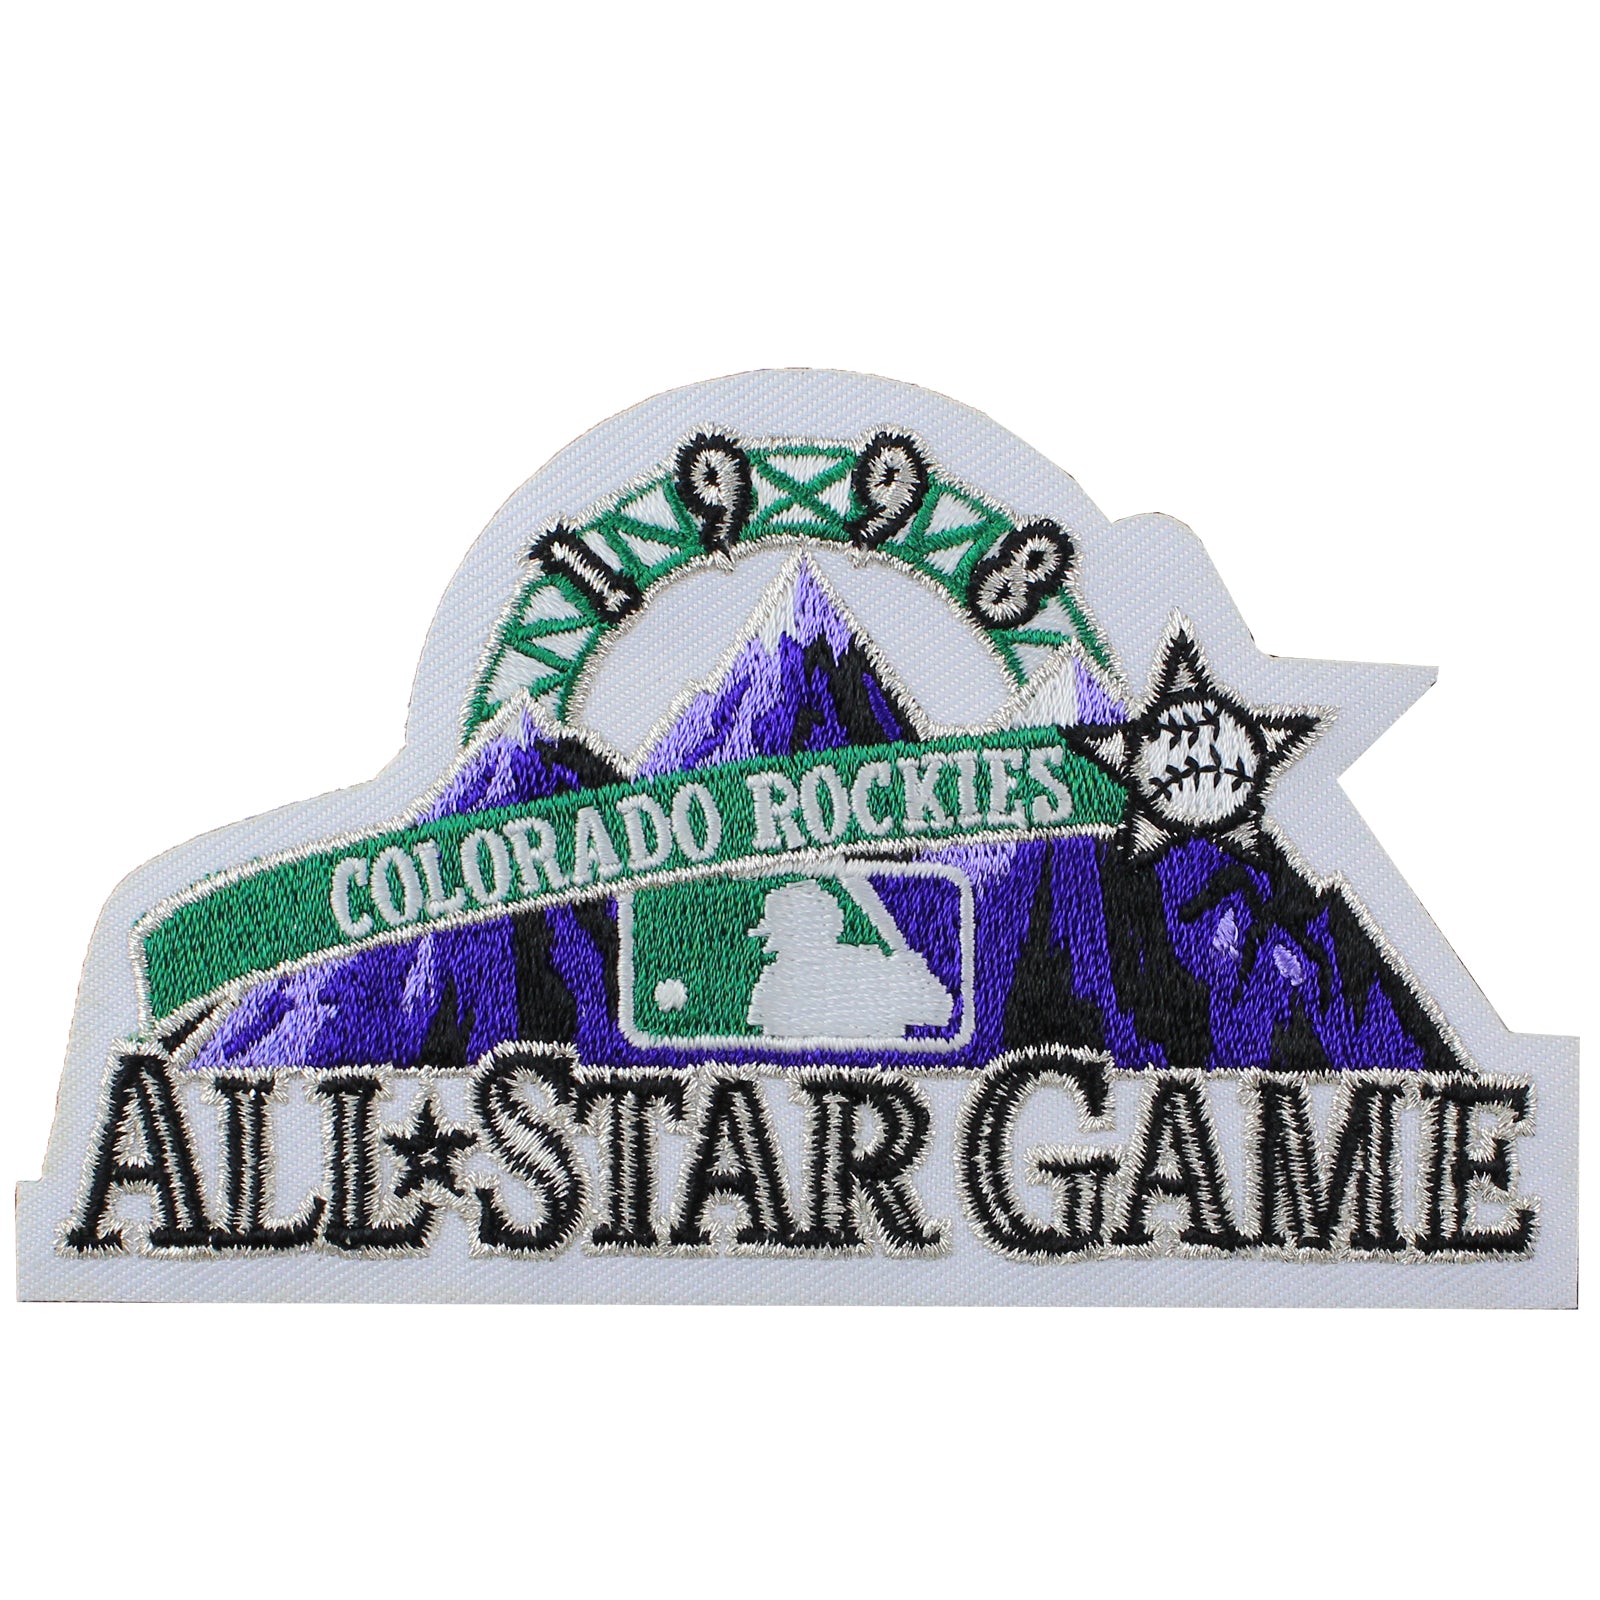  1998 Rockies BP All Star Game Jersey